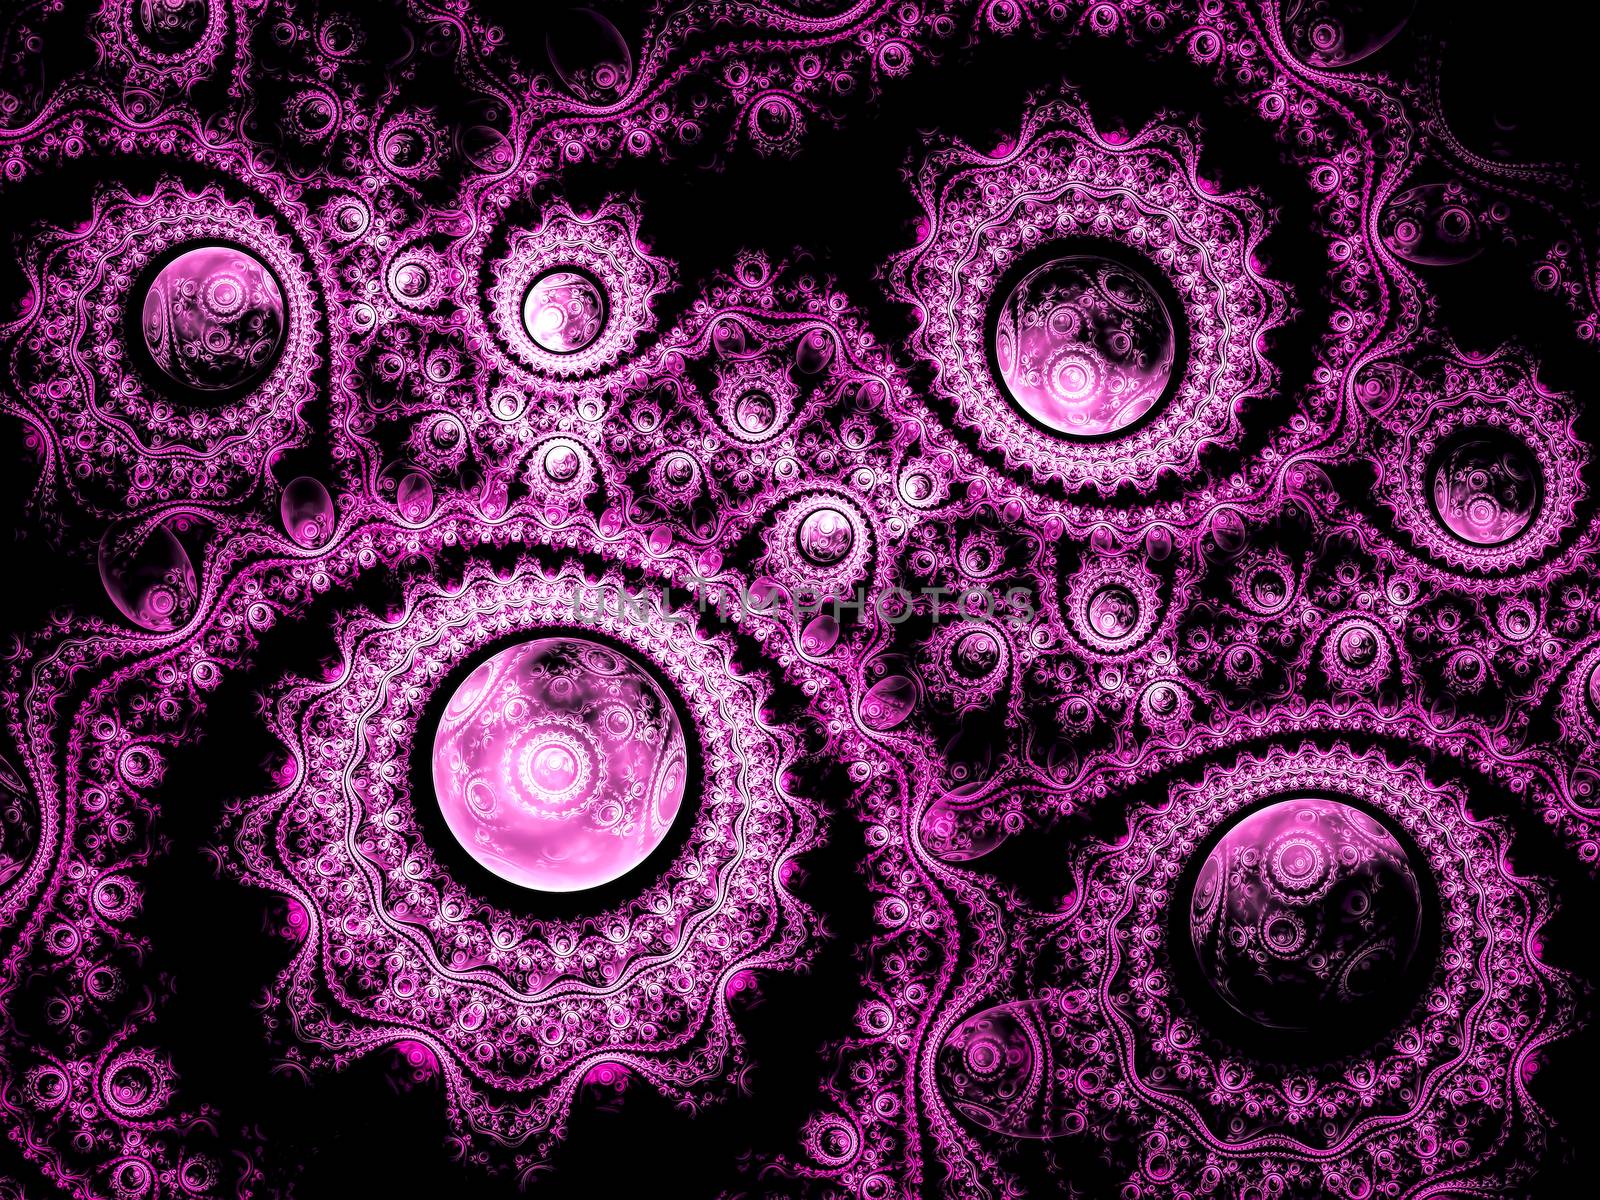 Abstract purple background - computer-generated image. Fractal art: intricate ornament of curls and spheres. For banners, posters, web design.